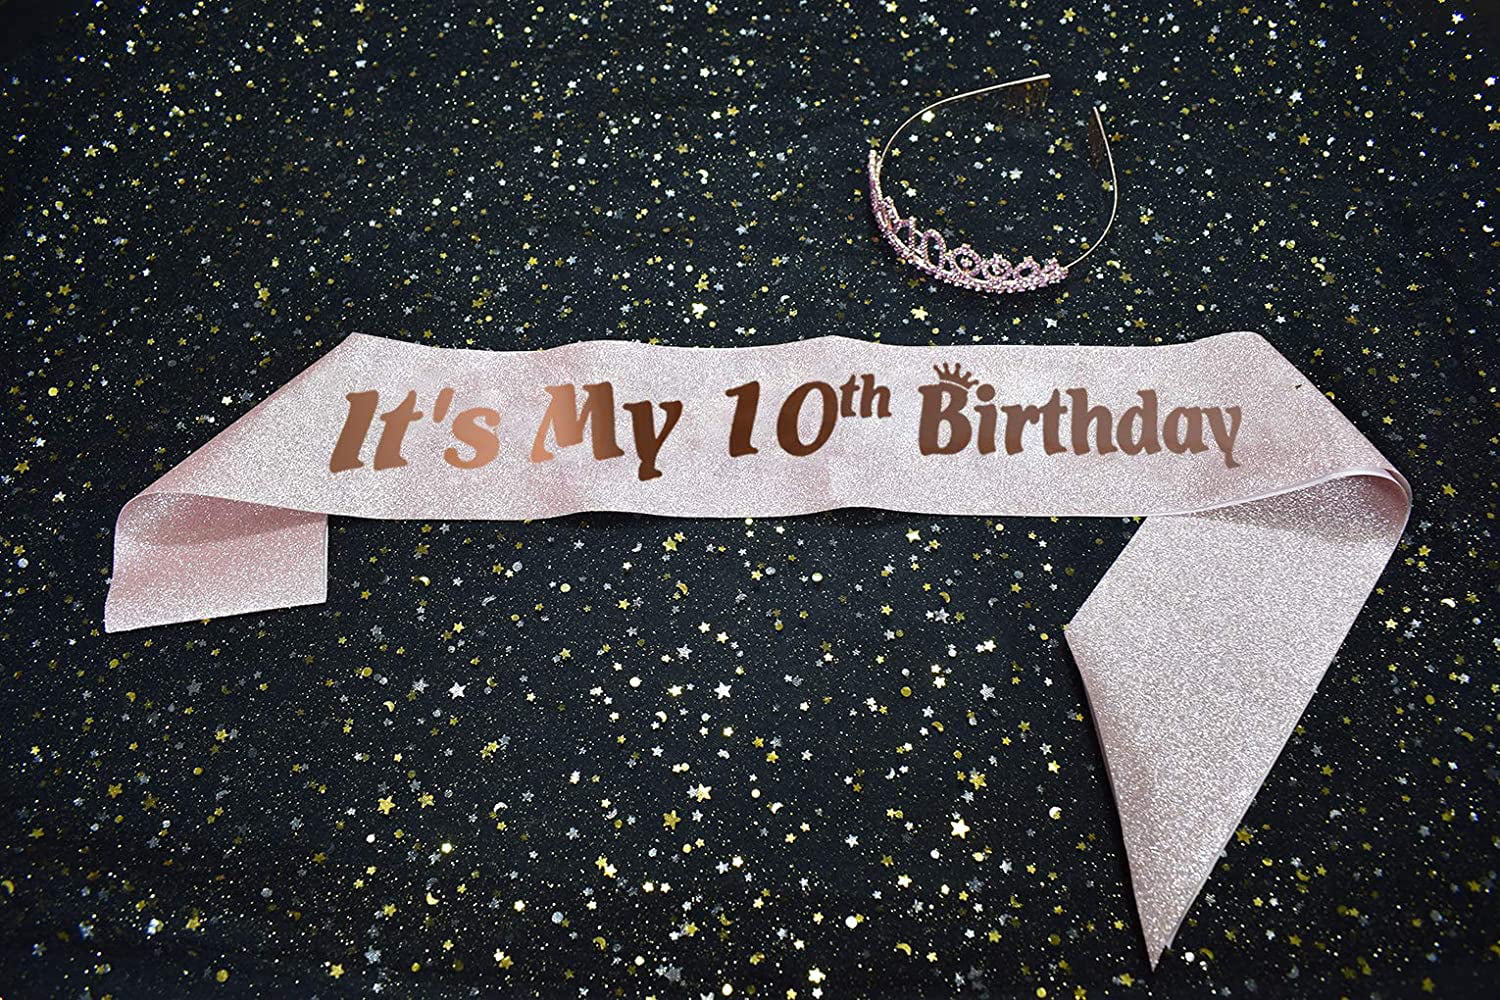 Silver 10th Birthday Tiara and Sash 10th Birthday Gifts 10th Birthday Party Supplies and Decorations 10th Silver Satin Sash 10 & FABULOUS Happy 10th Birth 10th Birthday Decorations Party Supplies 